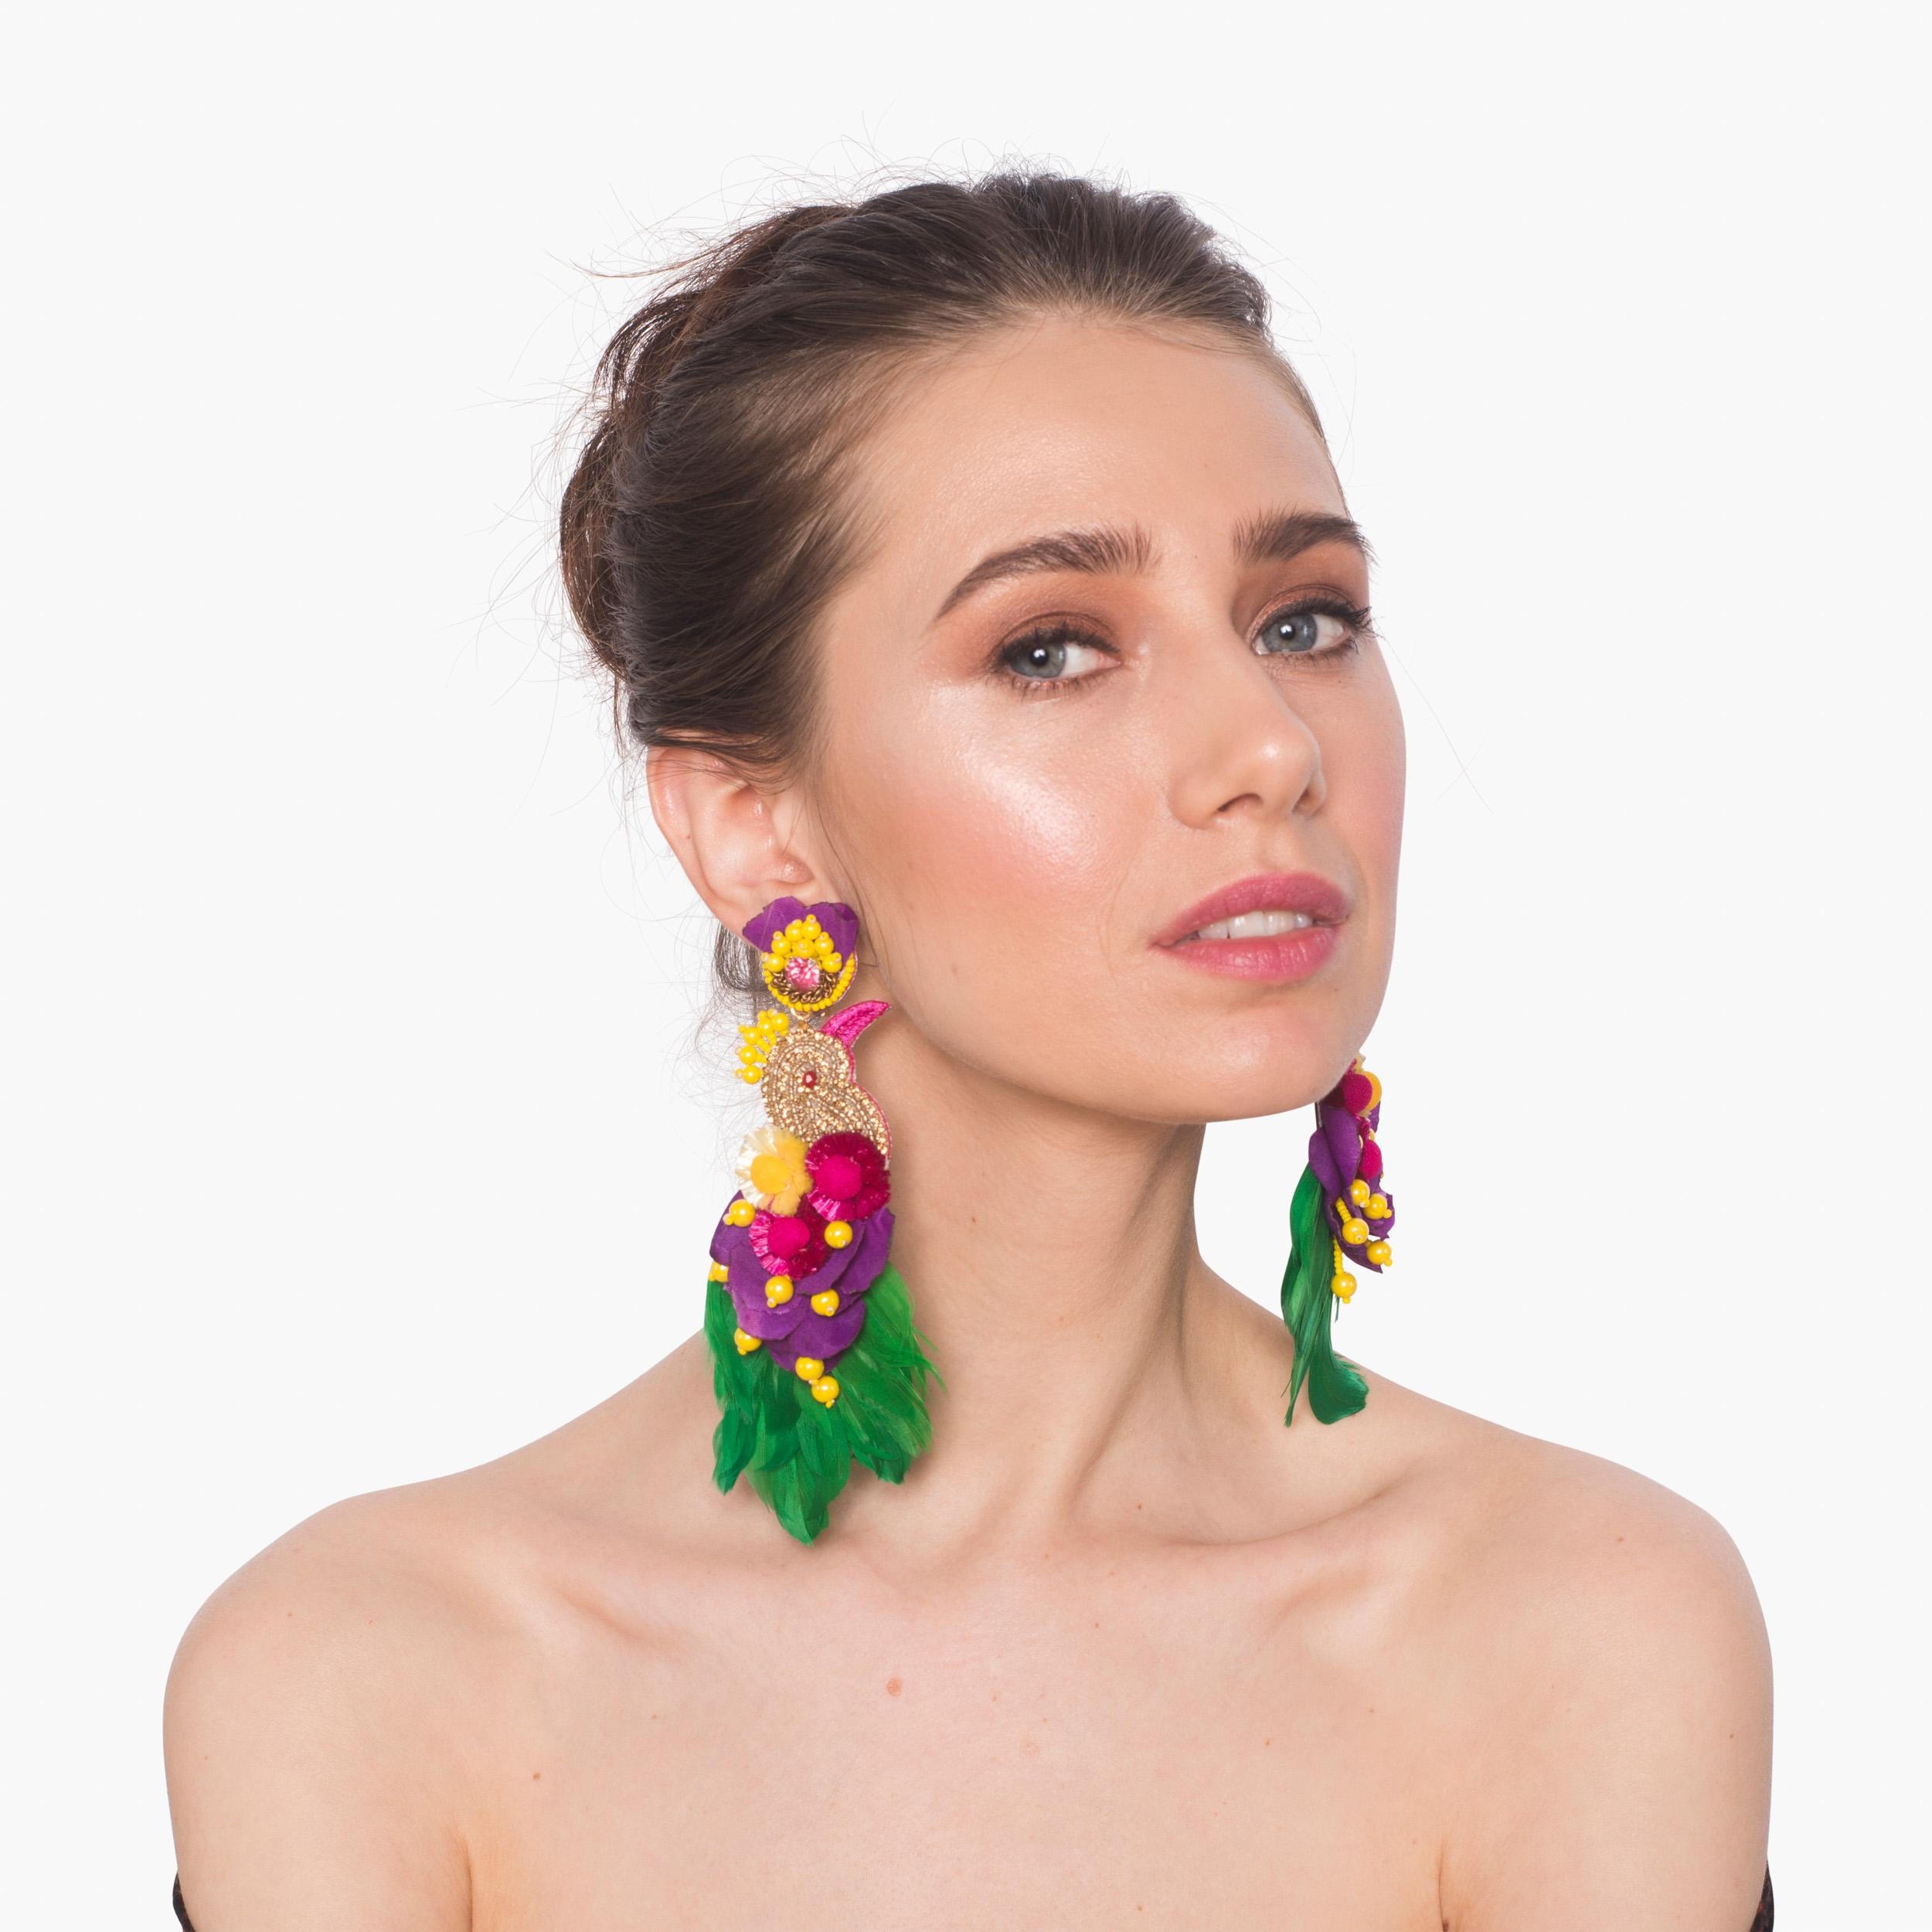 Travel to paradise in the Toucanet earring. Crystals, Raffia, and coque feathers make Toucanet a festive statement piece for any wardrobe.